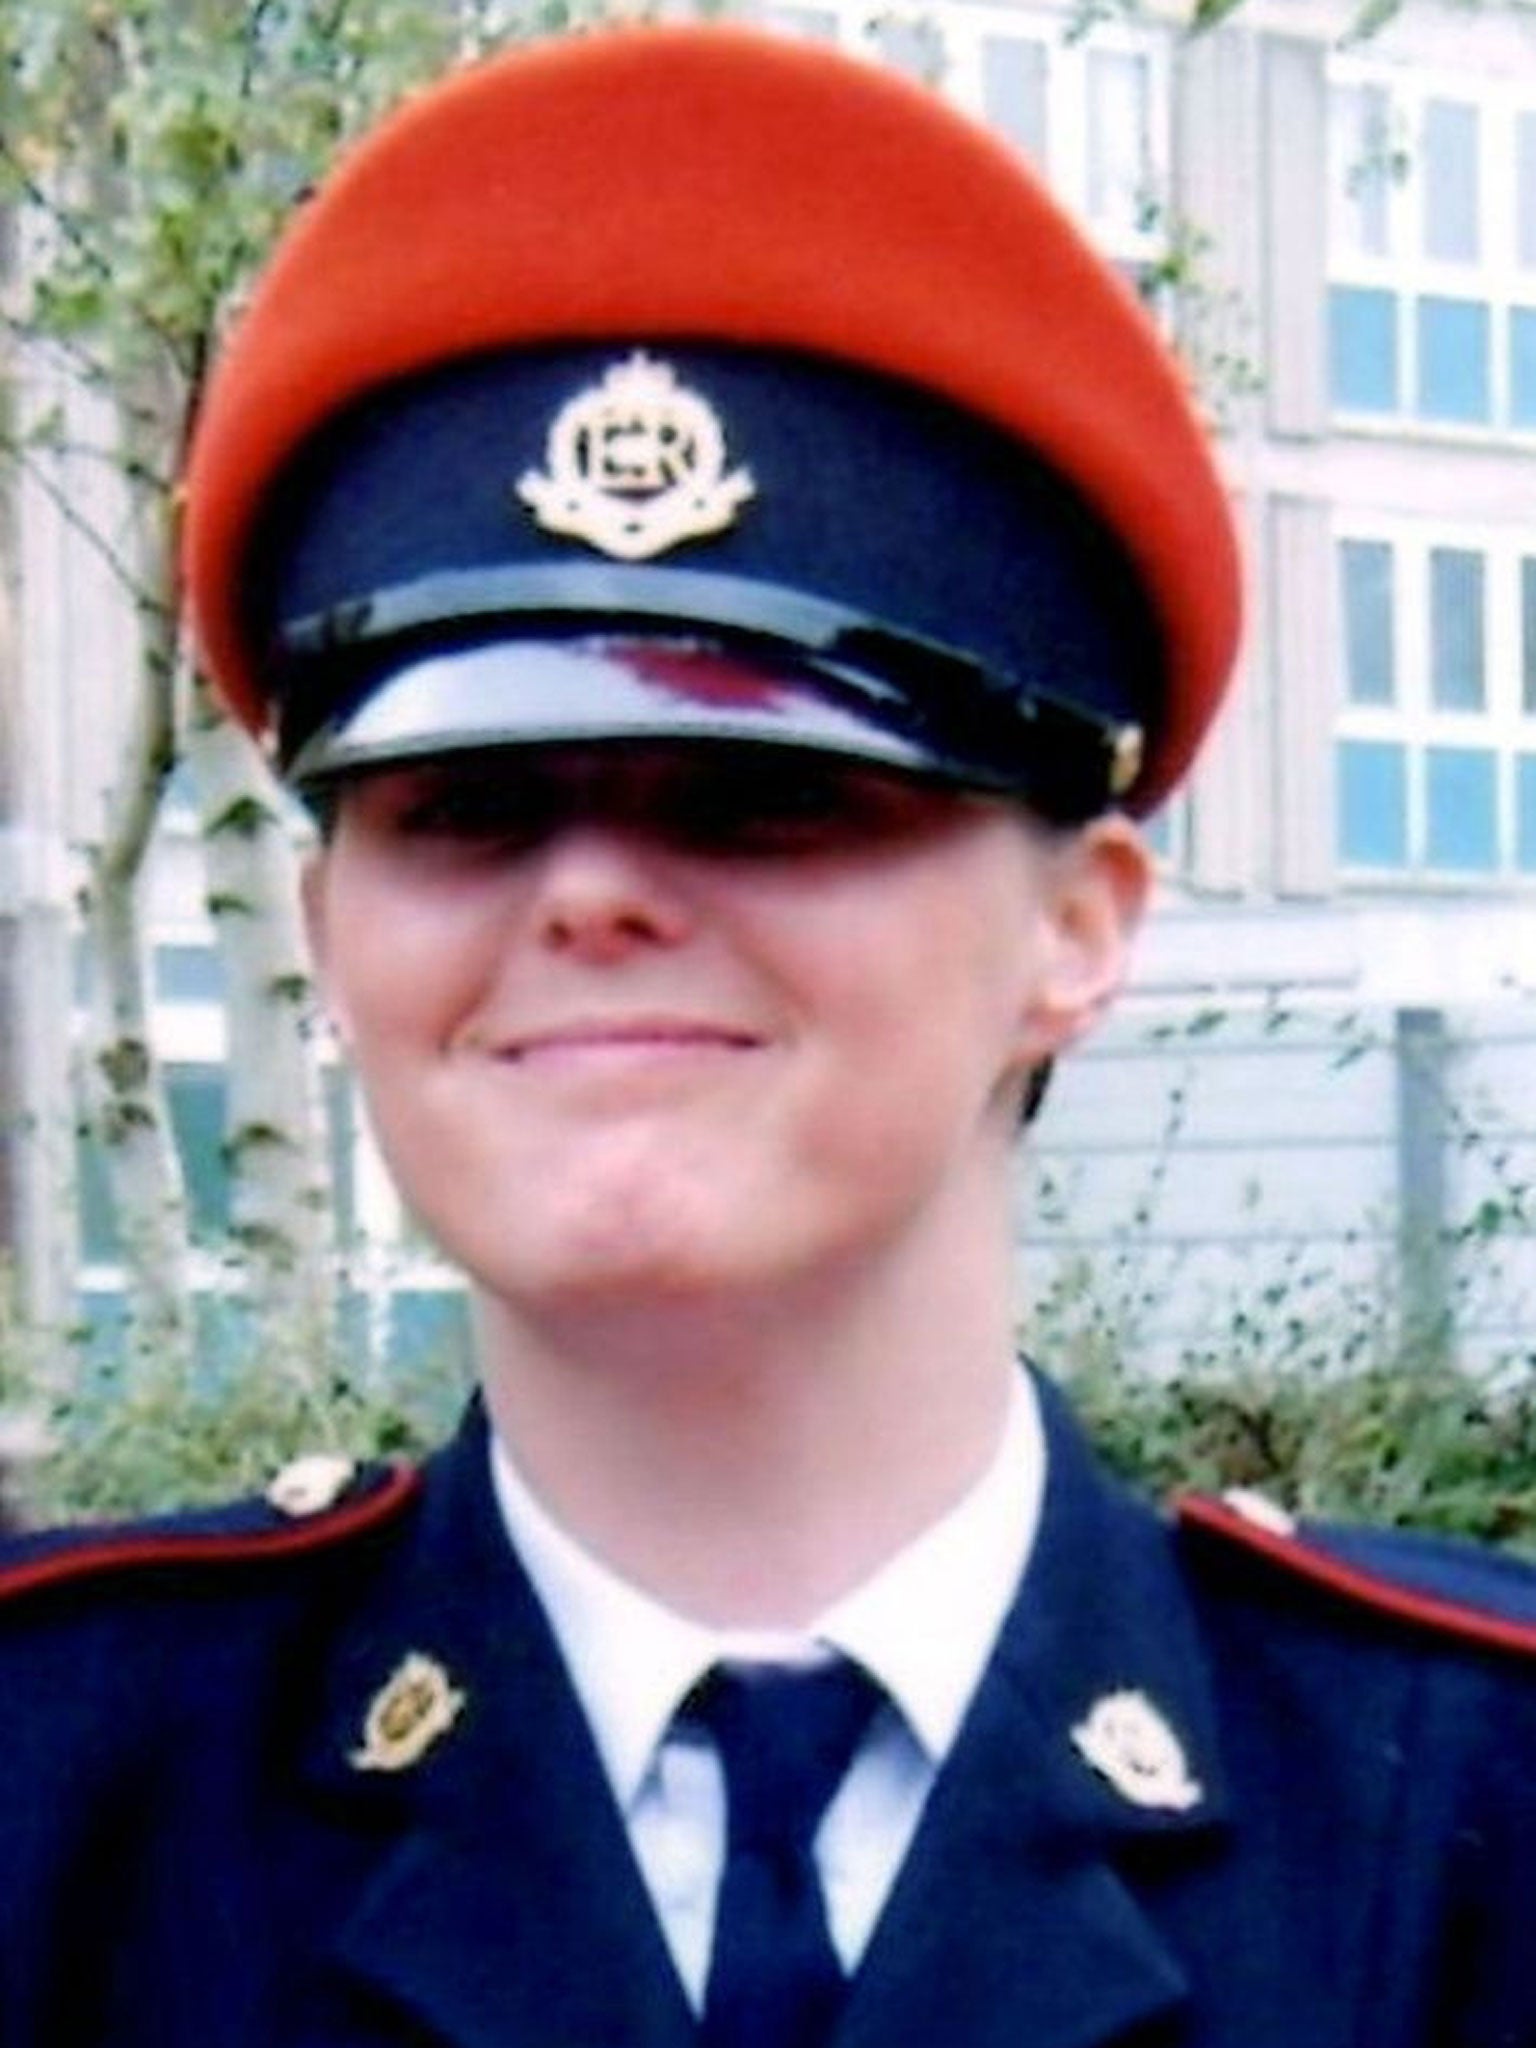 Corporal Anne-Marie Ellement, who was found hanging in her barracks after accusing colleagues of rape.